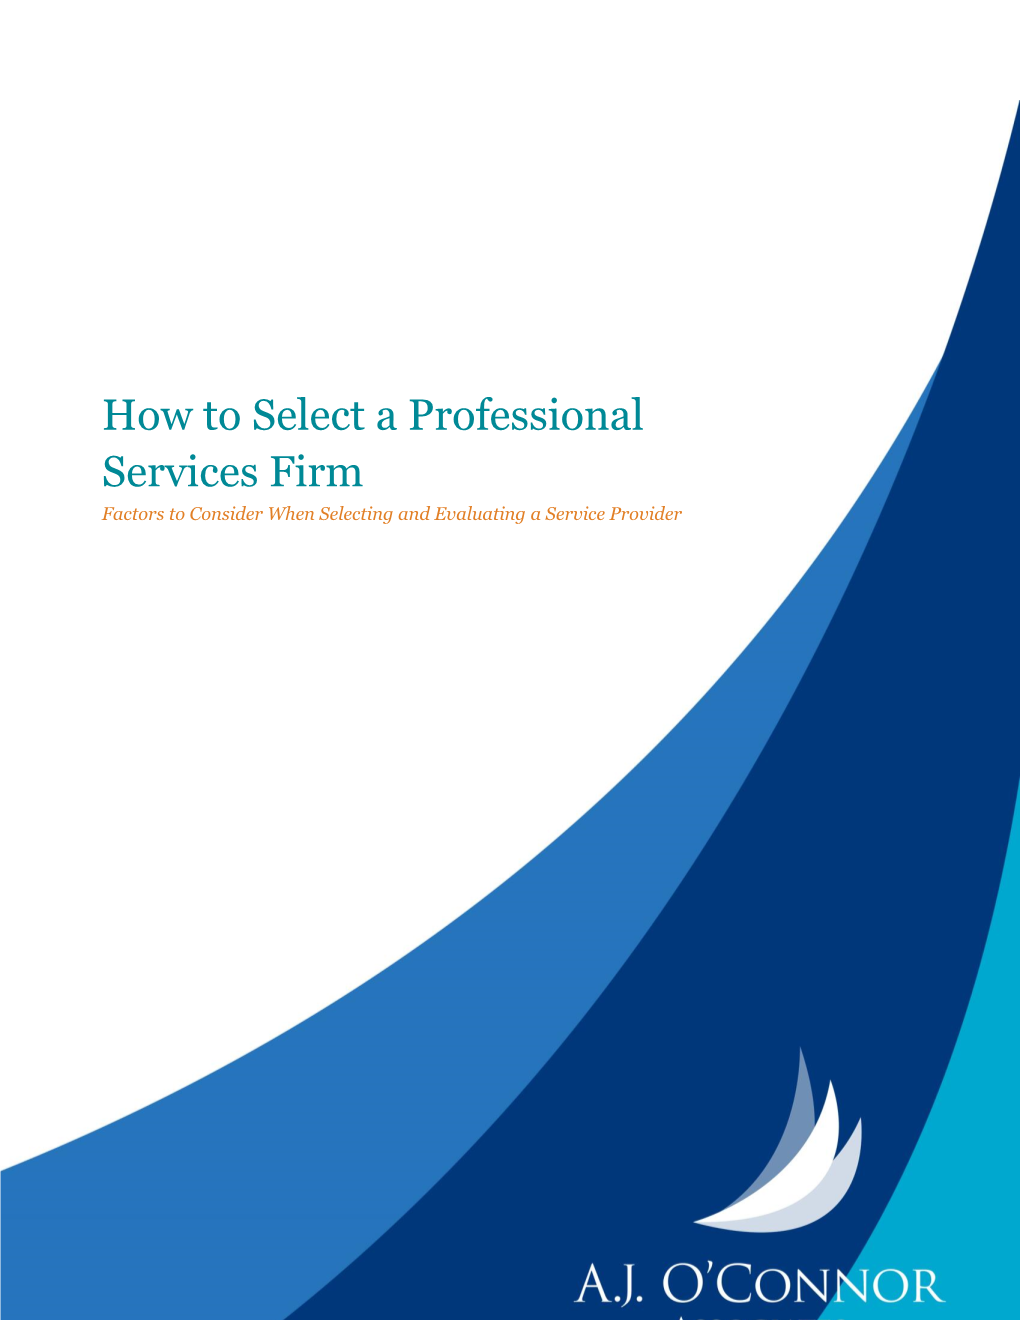 How to Select a Professional Services Firm Factors to Consider When Selecting and Evaluating a Service Provider